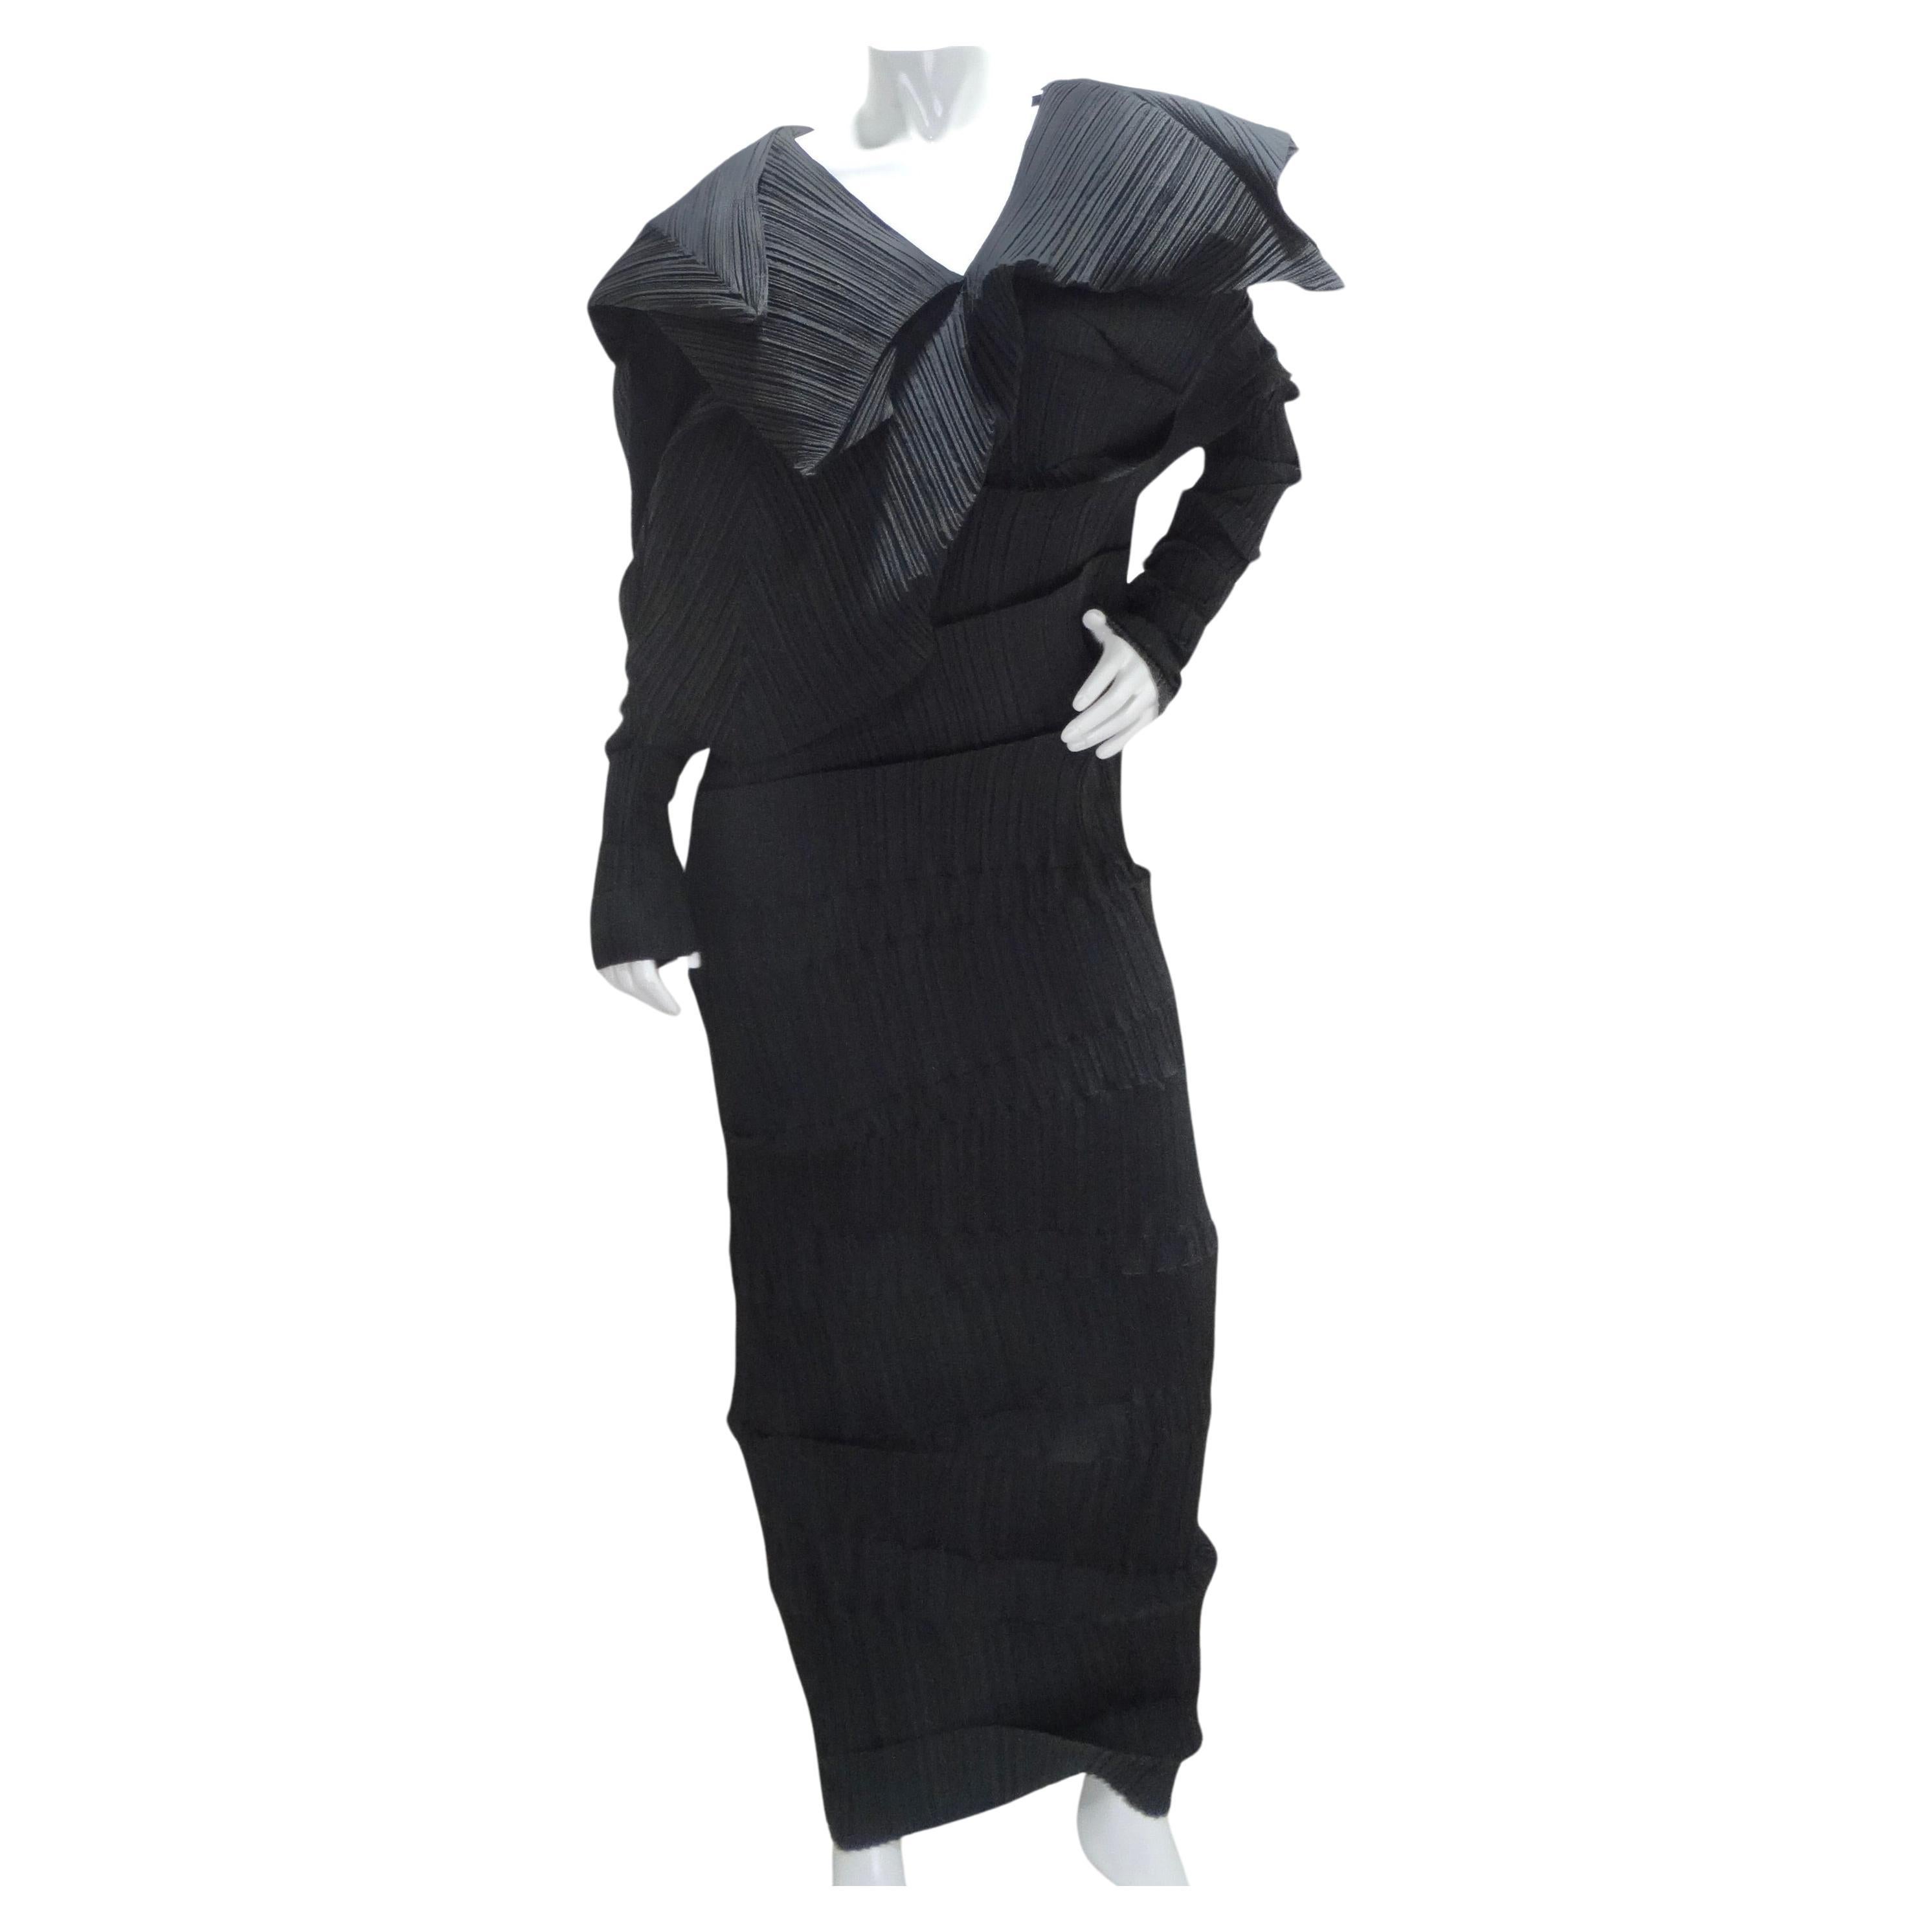 Issey Miyake 1989 Reverse Pleats Black Sculptural Museum Quality Dress For Sale